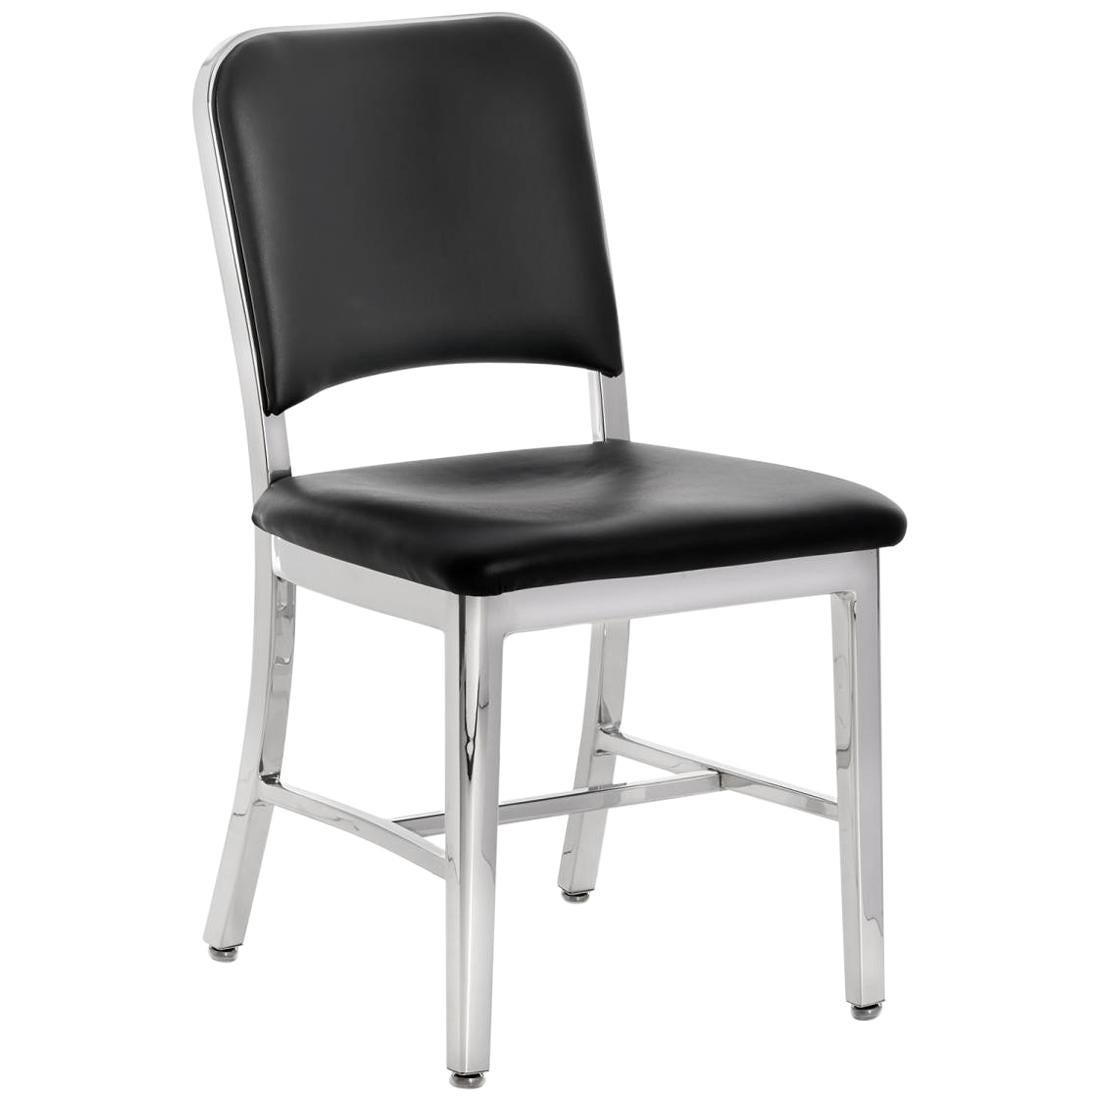 Emeco Navy® Chair in Polished Aluminum & Black Upholstery by US Navy